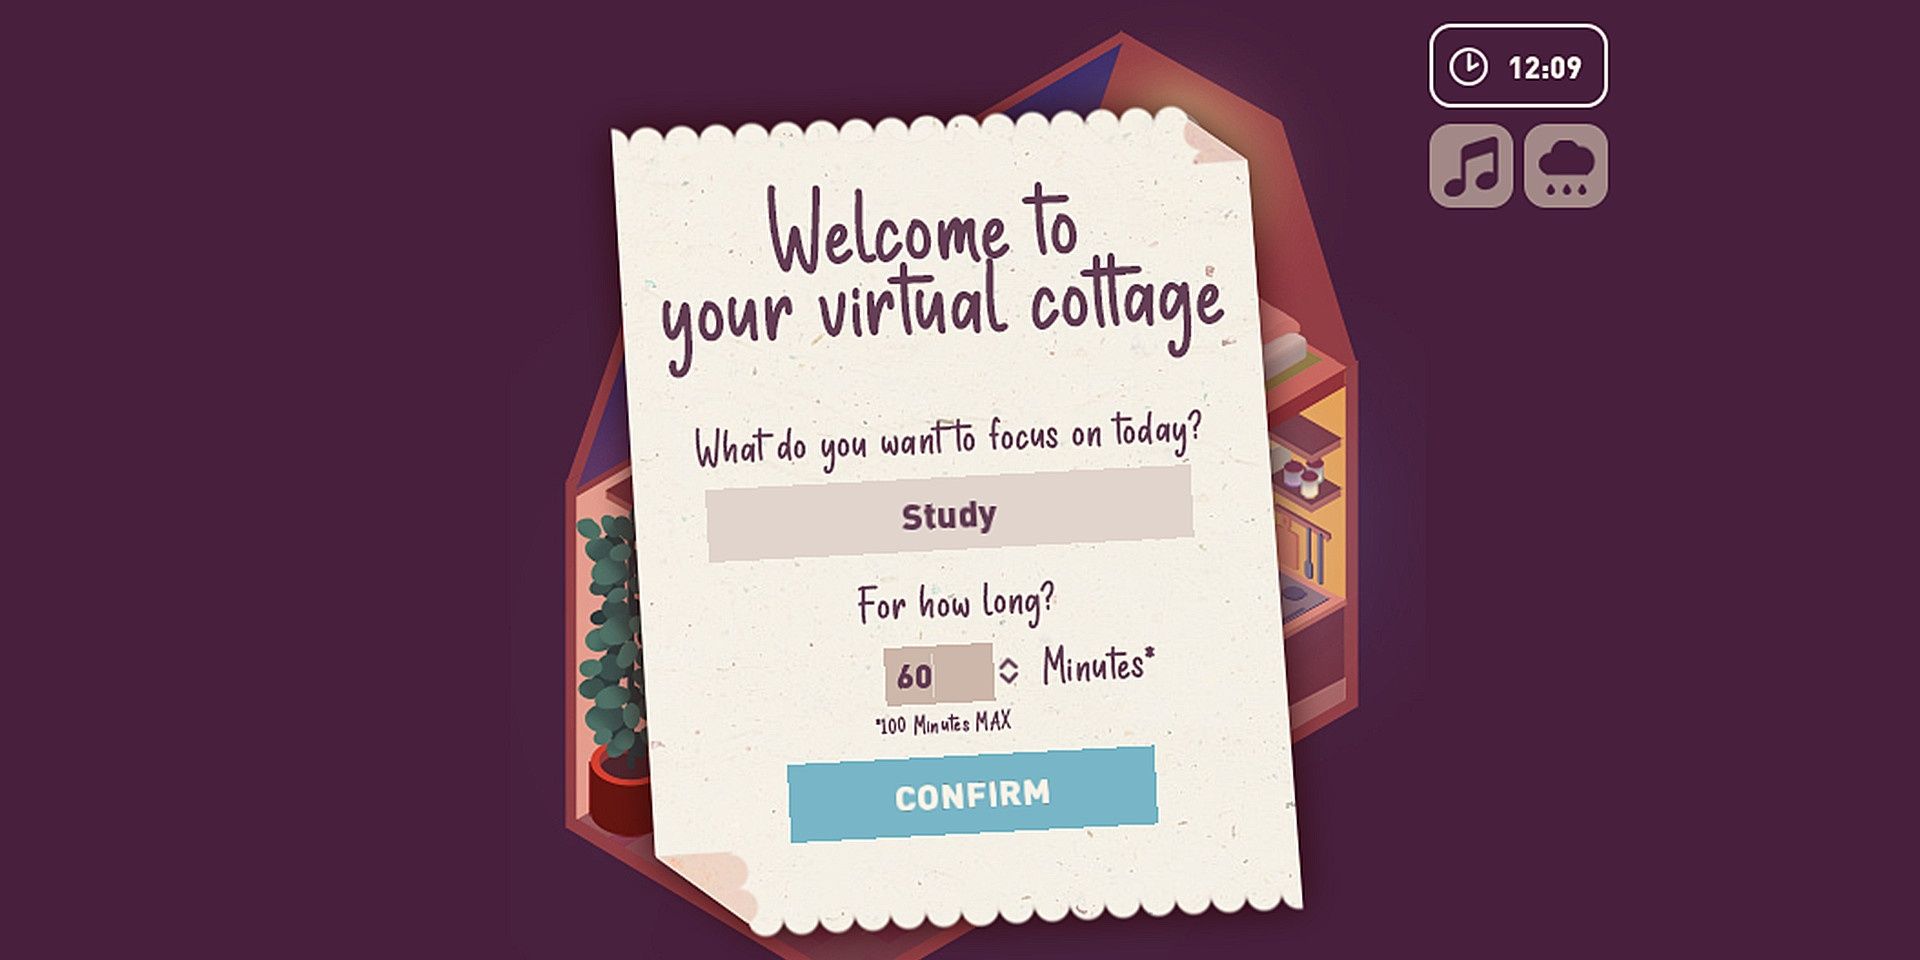 Virtual cottage home screen reads welcome to your virtual cottage and has options to input your task and a timer